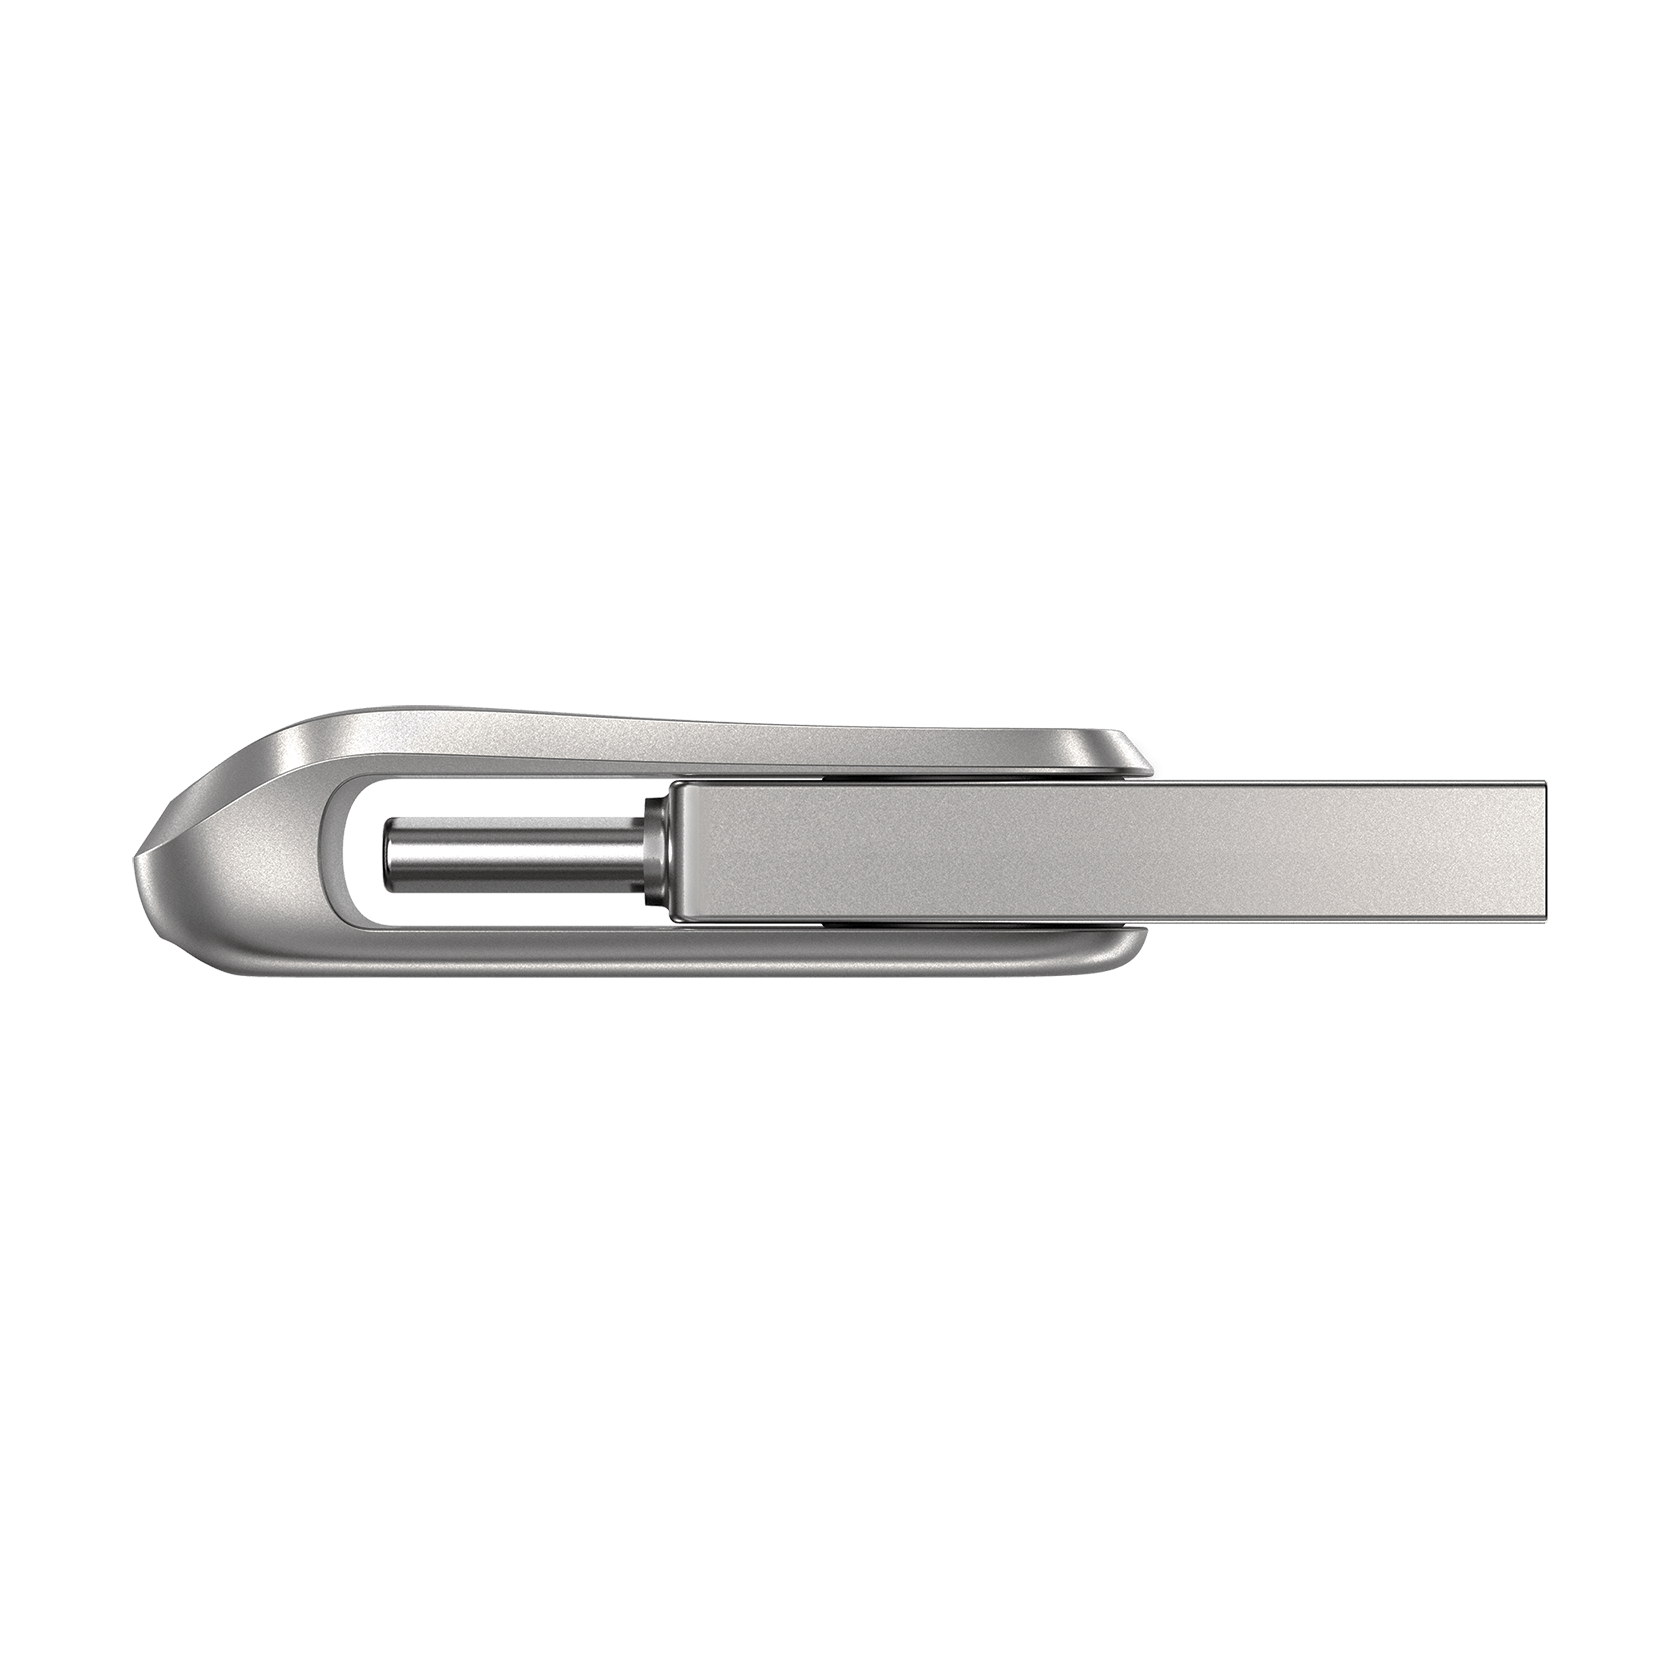 SanDisk 256GB Ultra Dual Drive Luxe USB Type-C Flash Drive - SDDDC4-256G-G46 - image 5 of 8